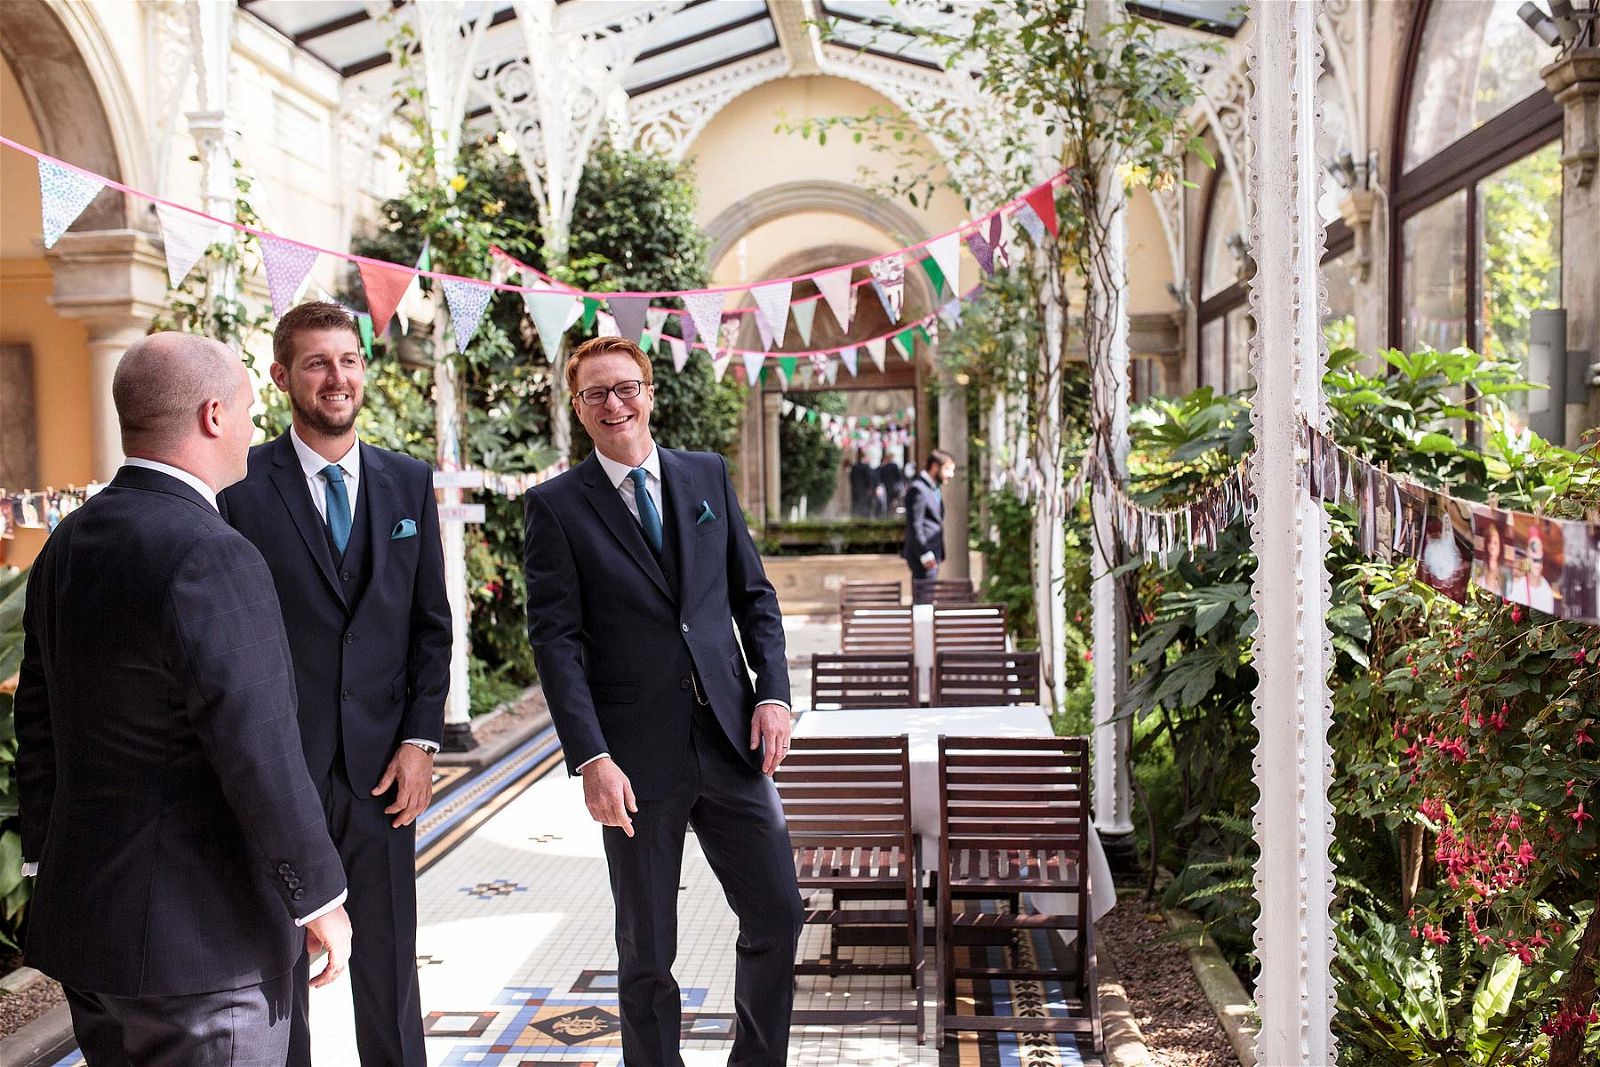 Reportage photographs capture the mood of the groomsmen upon arrival at Sandon Hall in Stafford by Stafford Documentary Wedding Photographer Stuart James